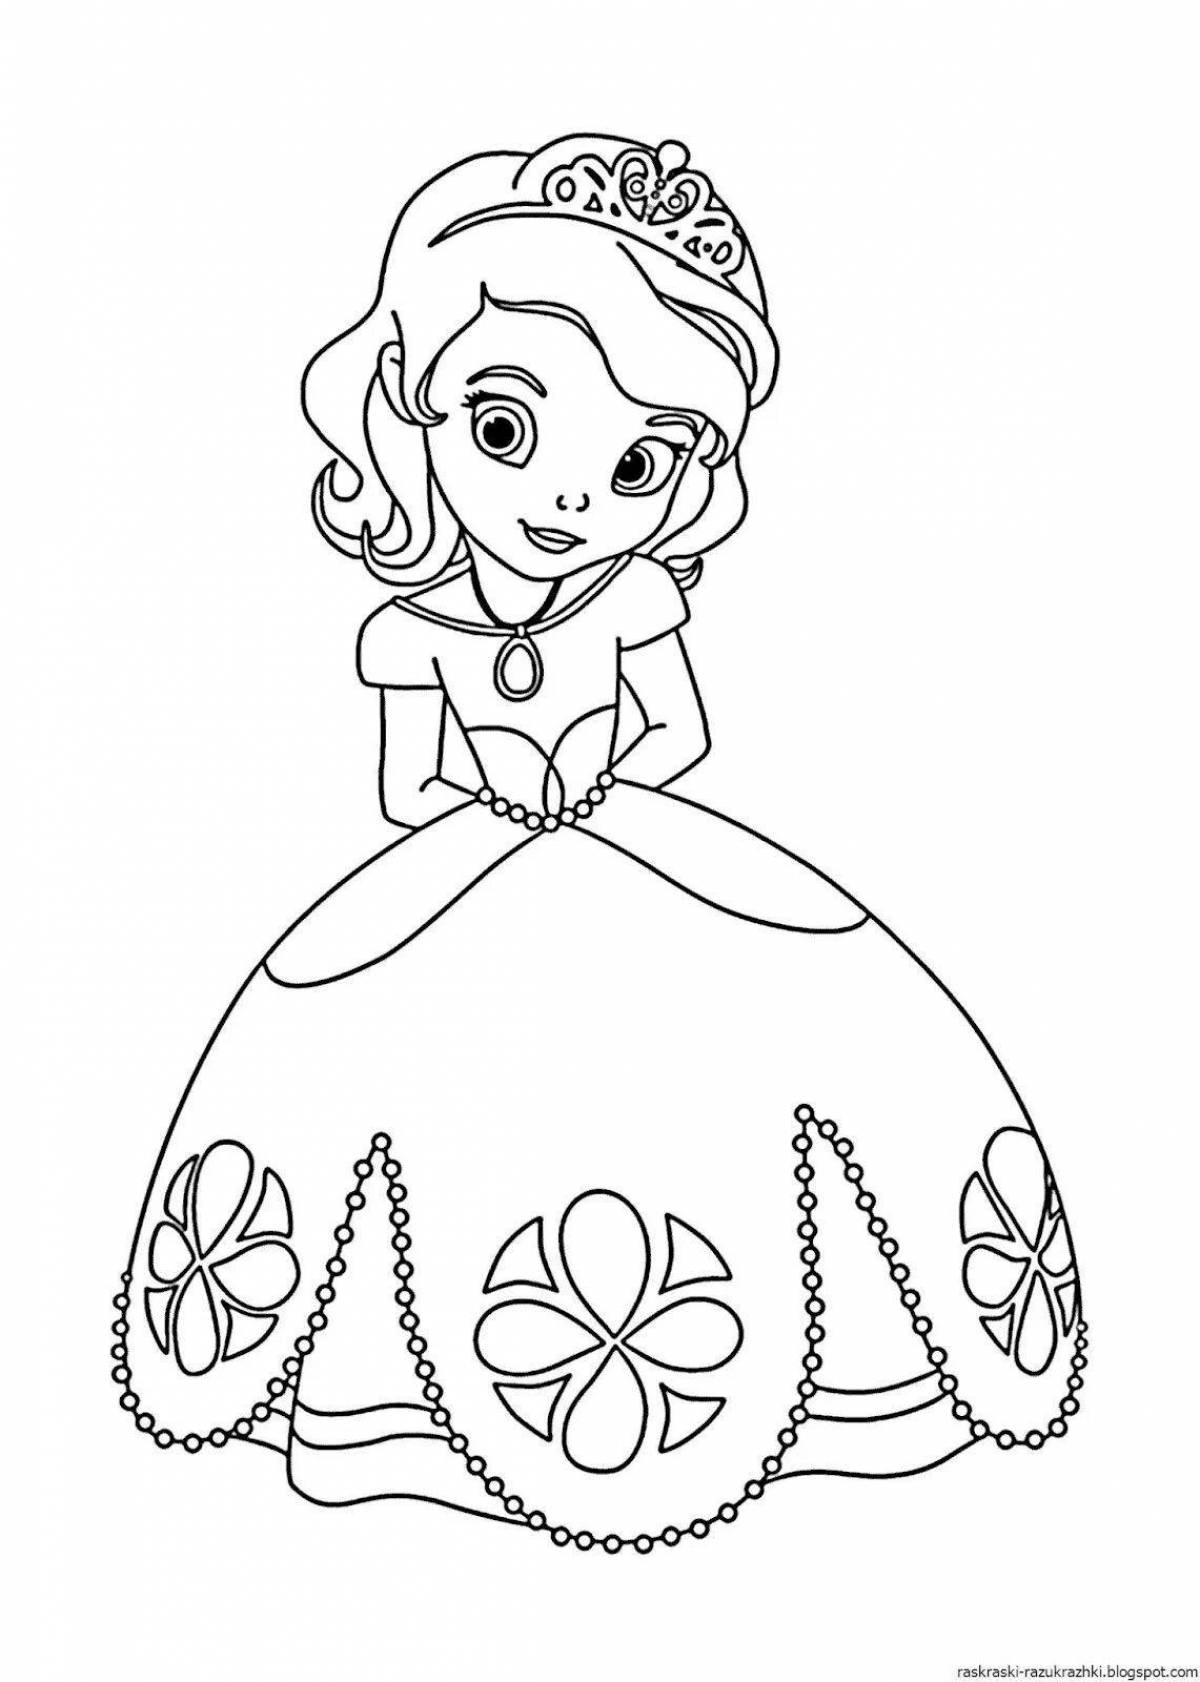 Fancy coloring of princesses 4-5 years old